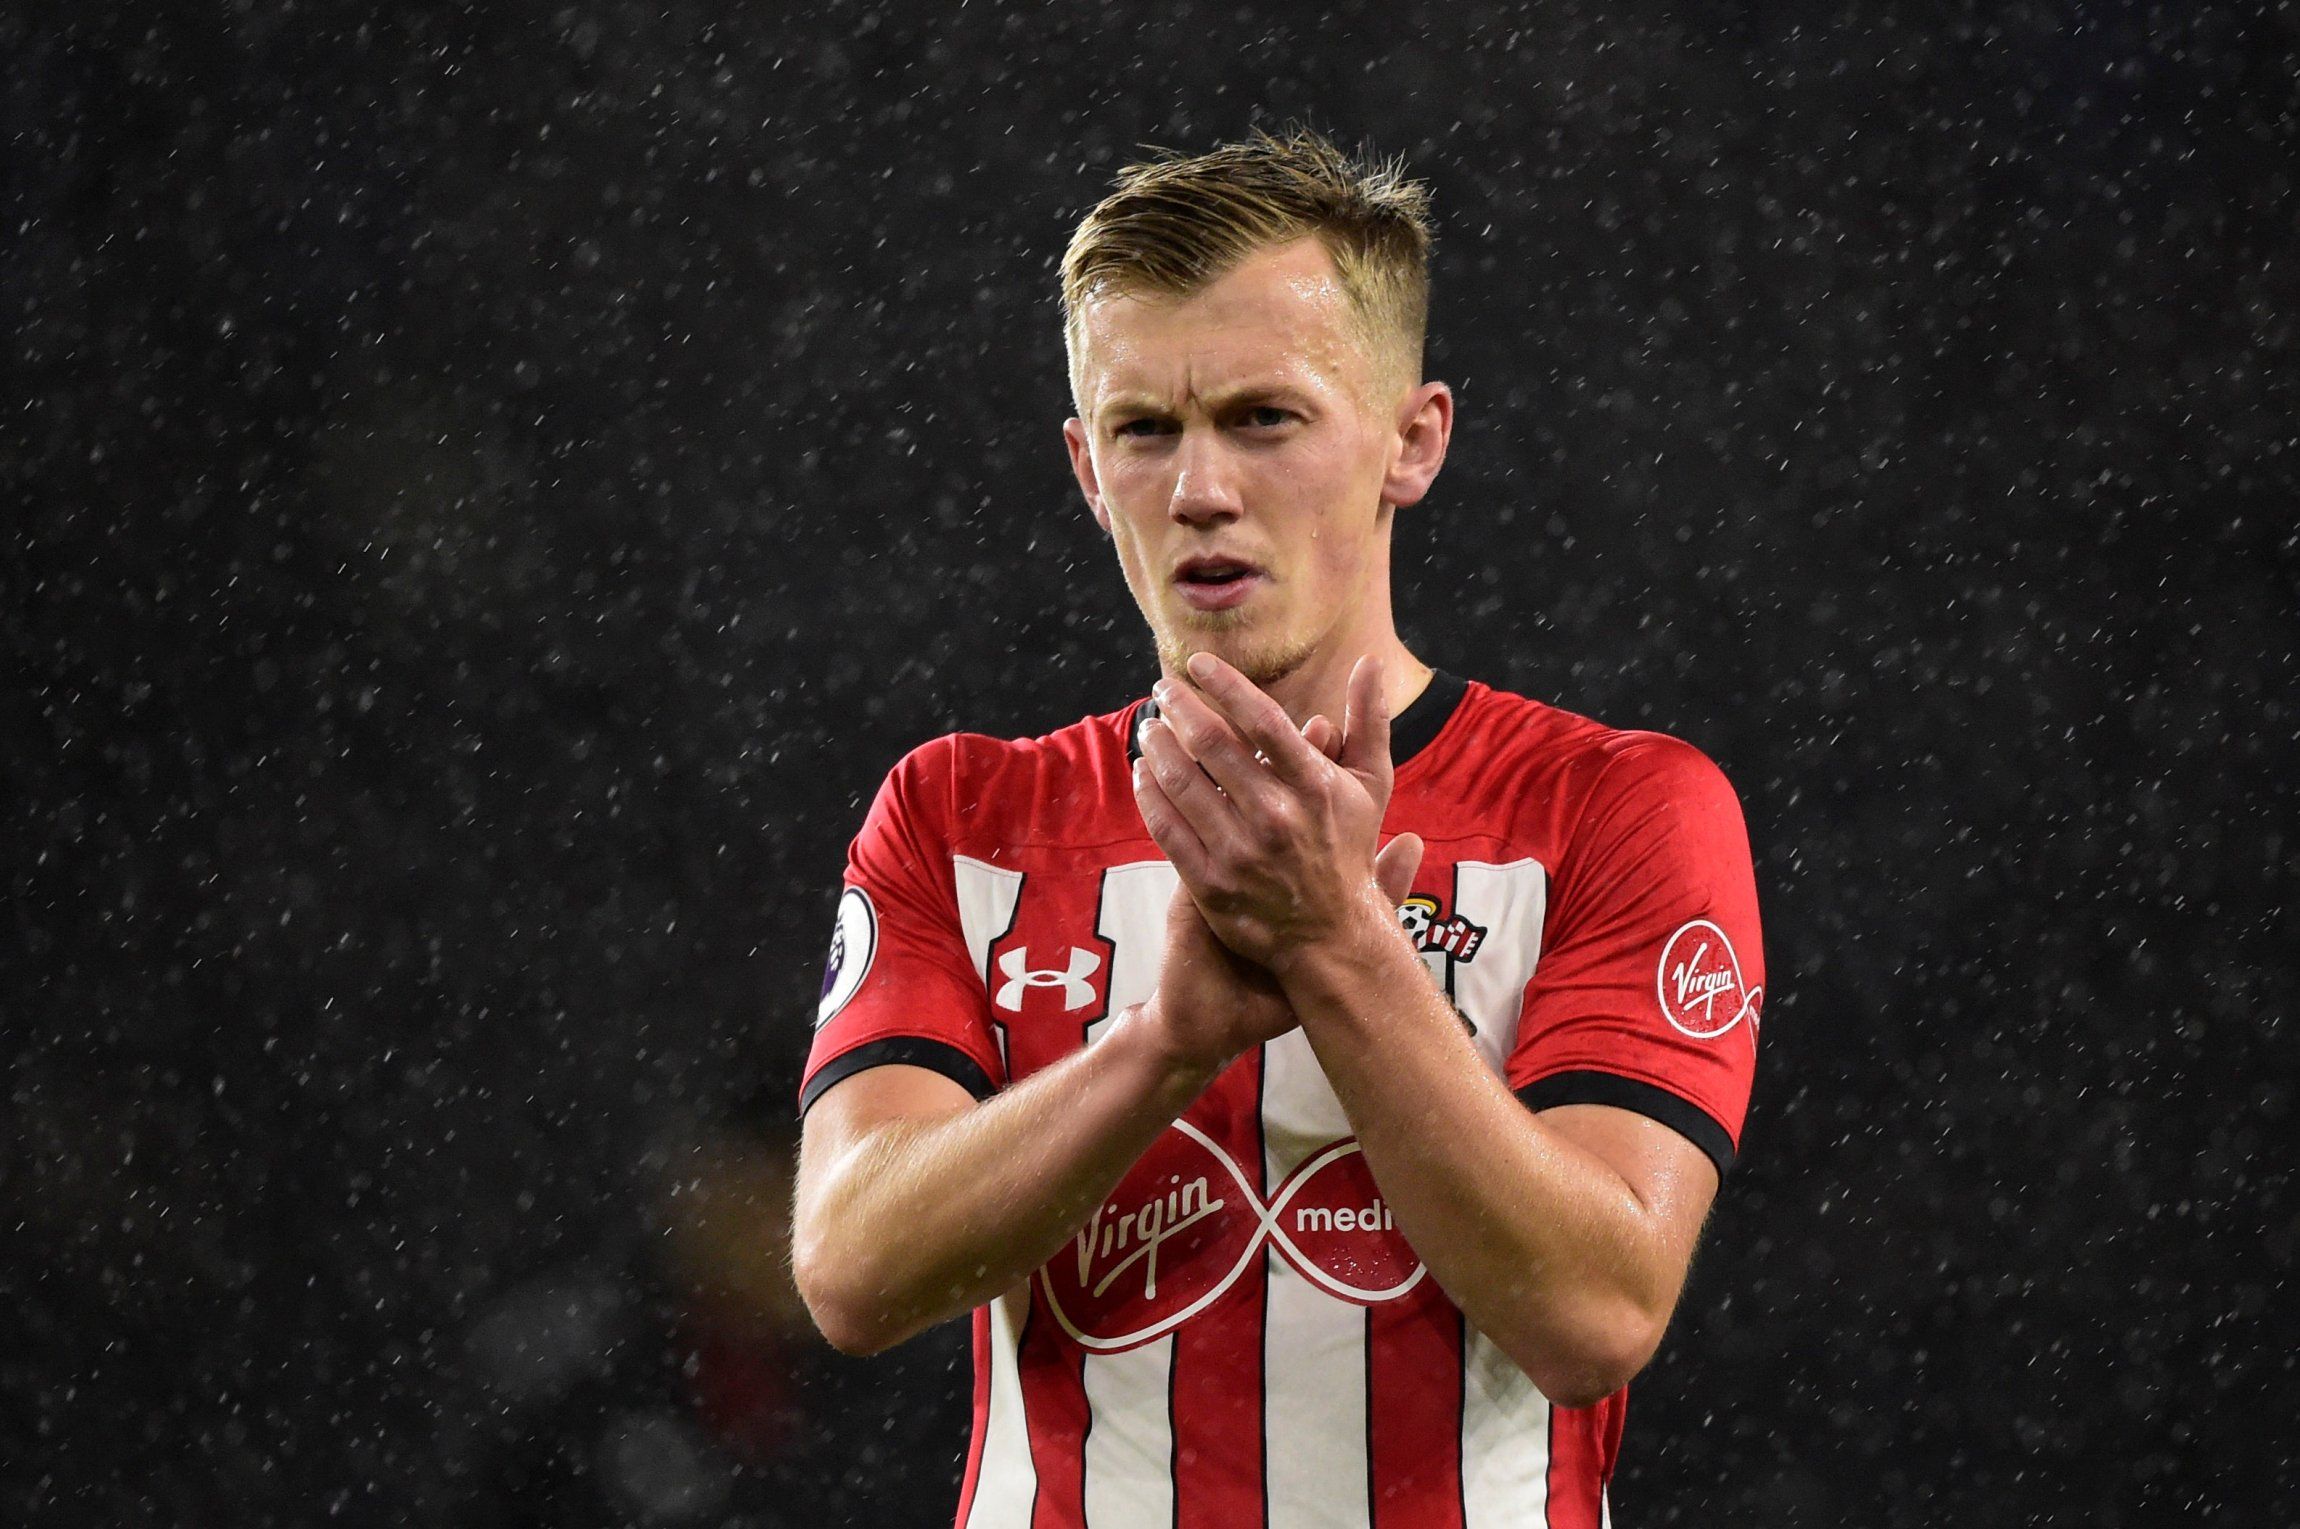 Southampton midfielder James Ward-Prowse applauds the fans after Cardiff City defeat